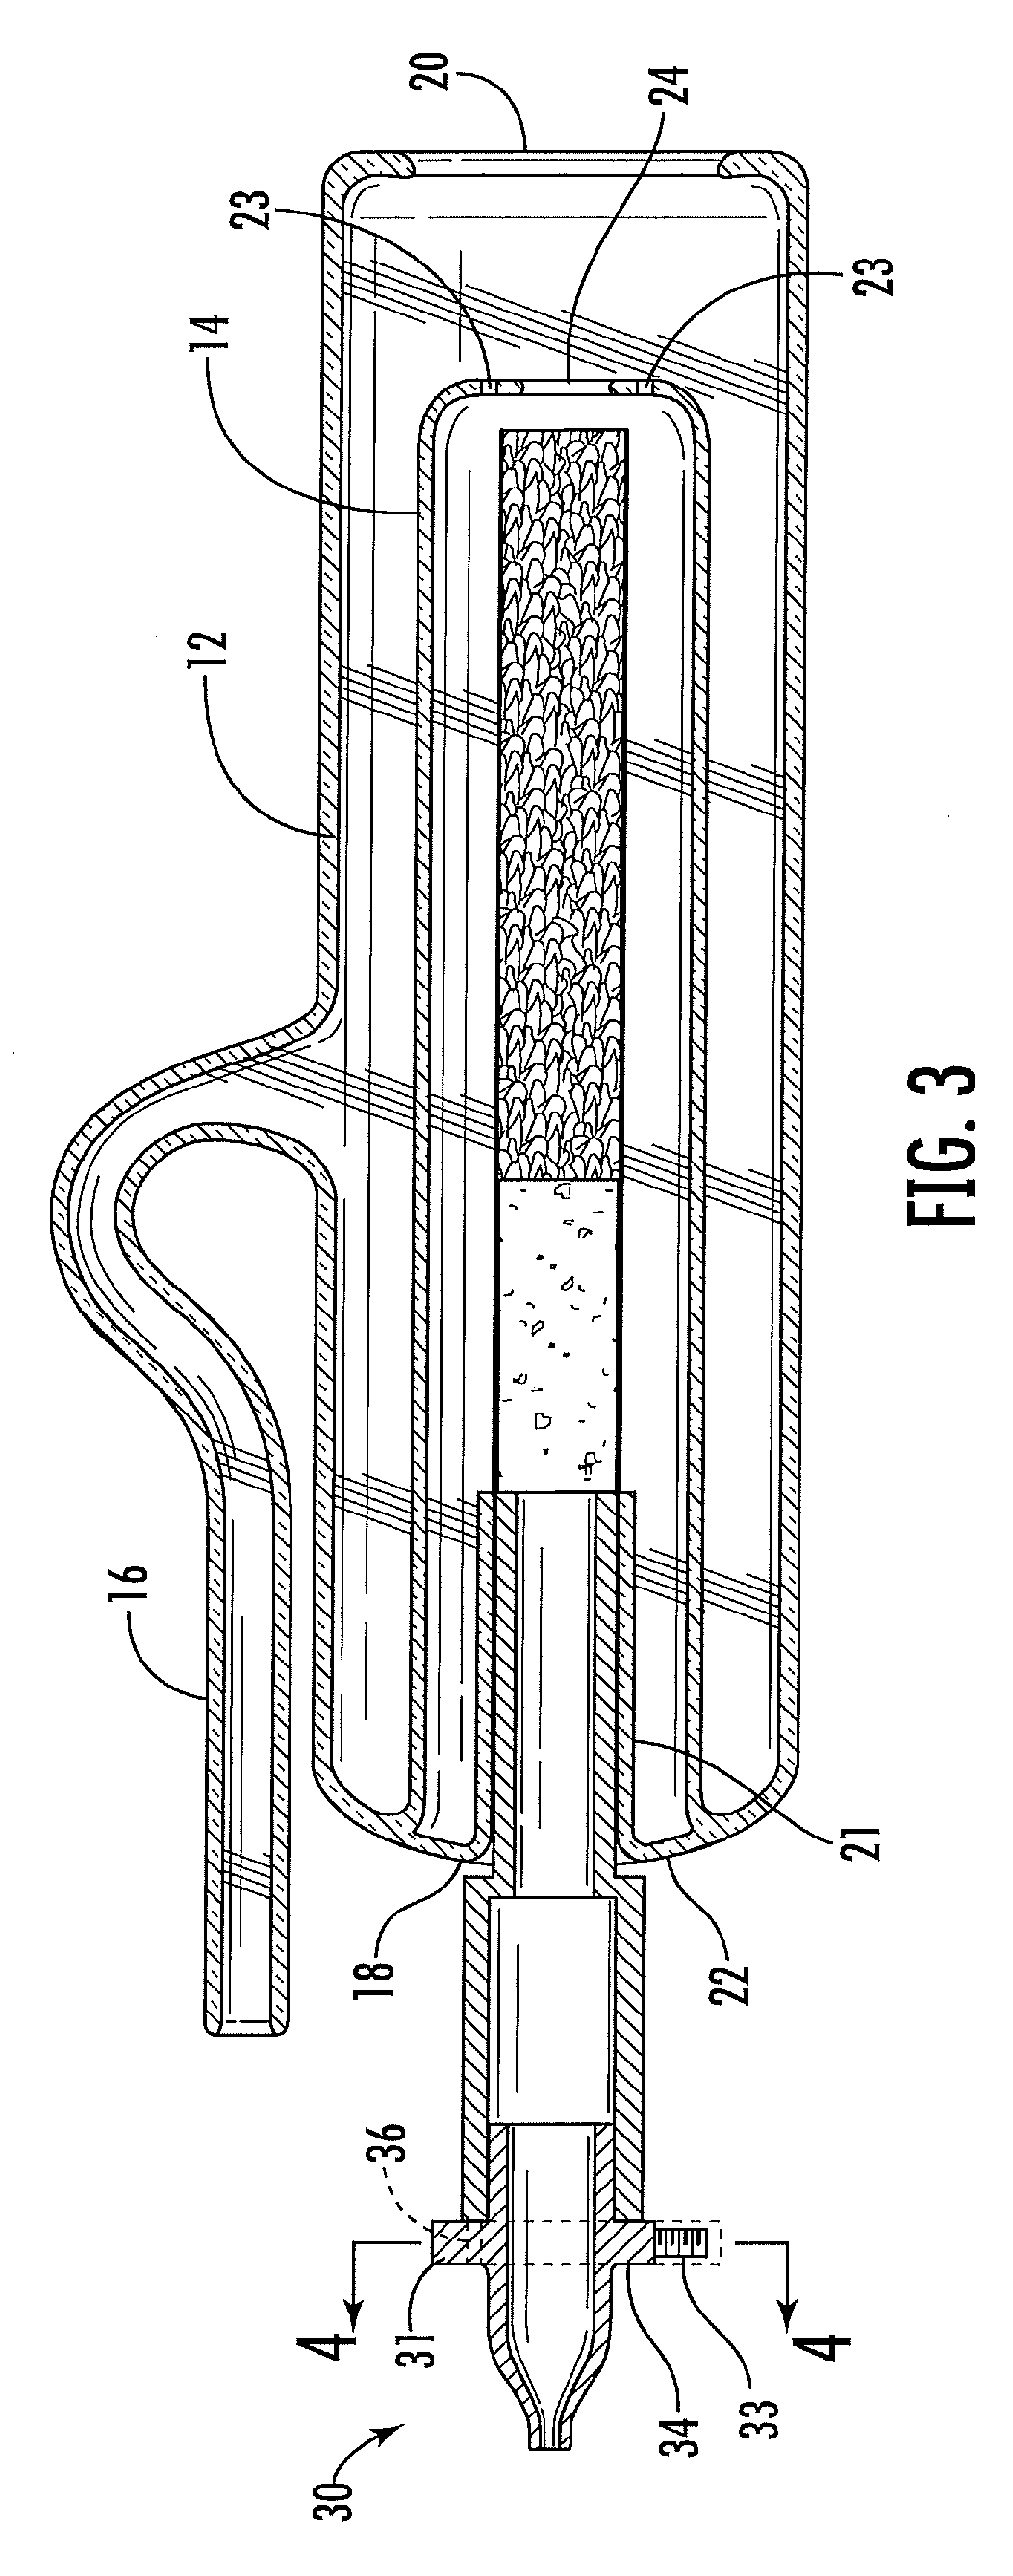 Hand-held smoke containment and filter device